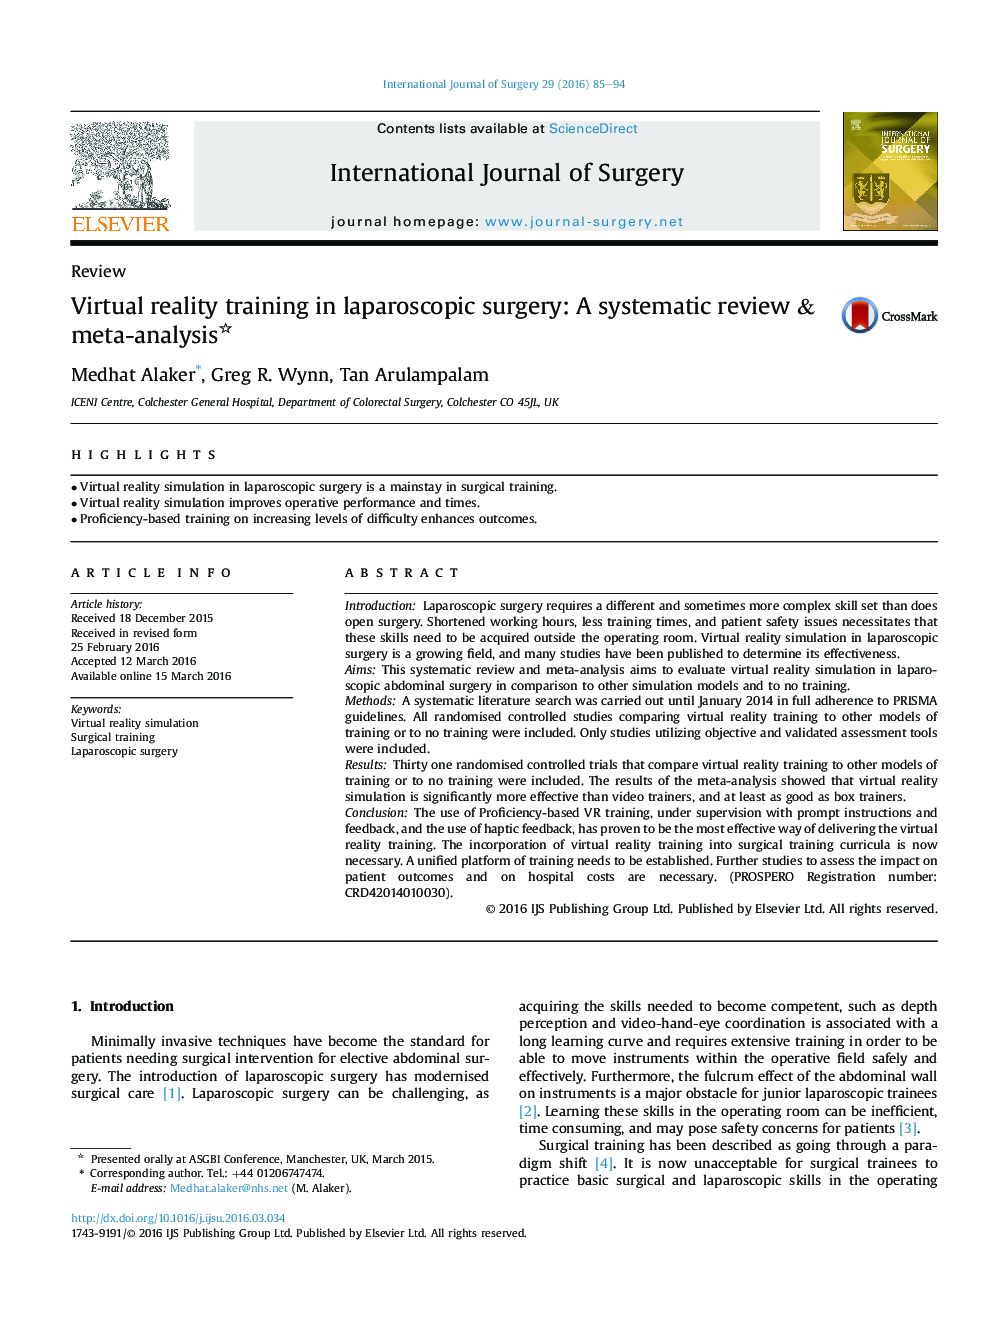 Virtual reality training in laparoscopic surgery: A systematic review & meta-analysis 